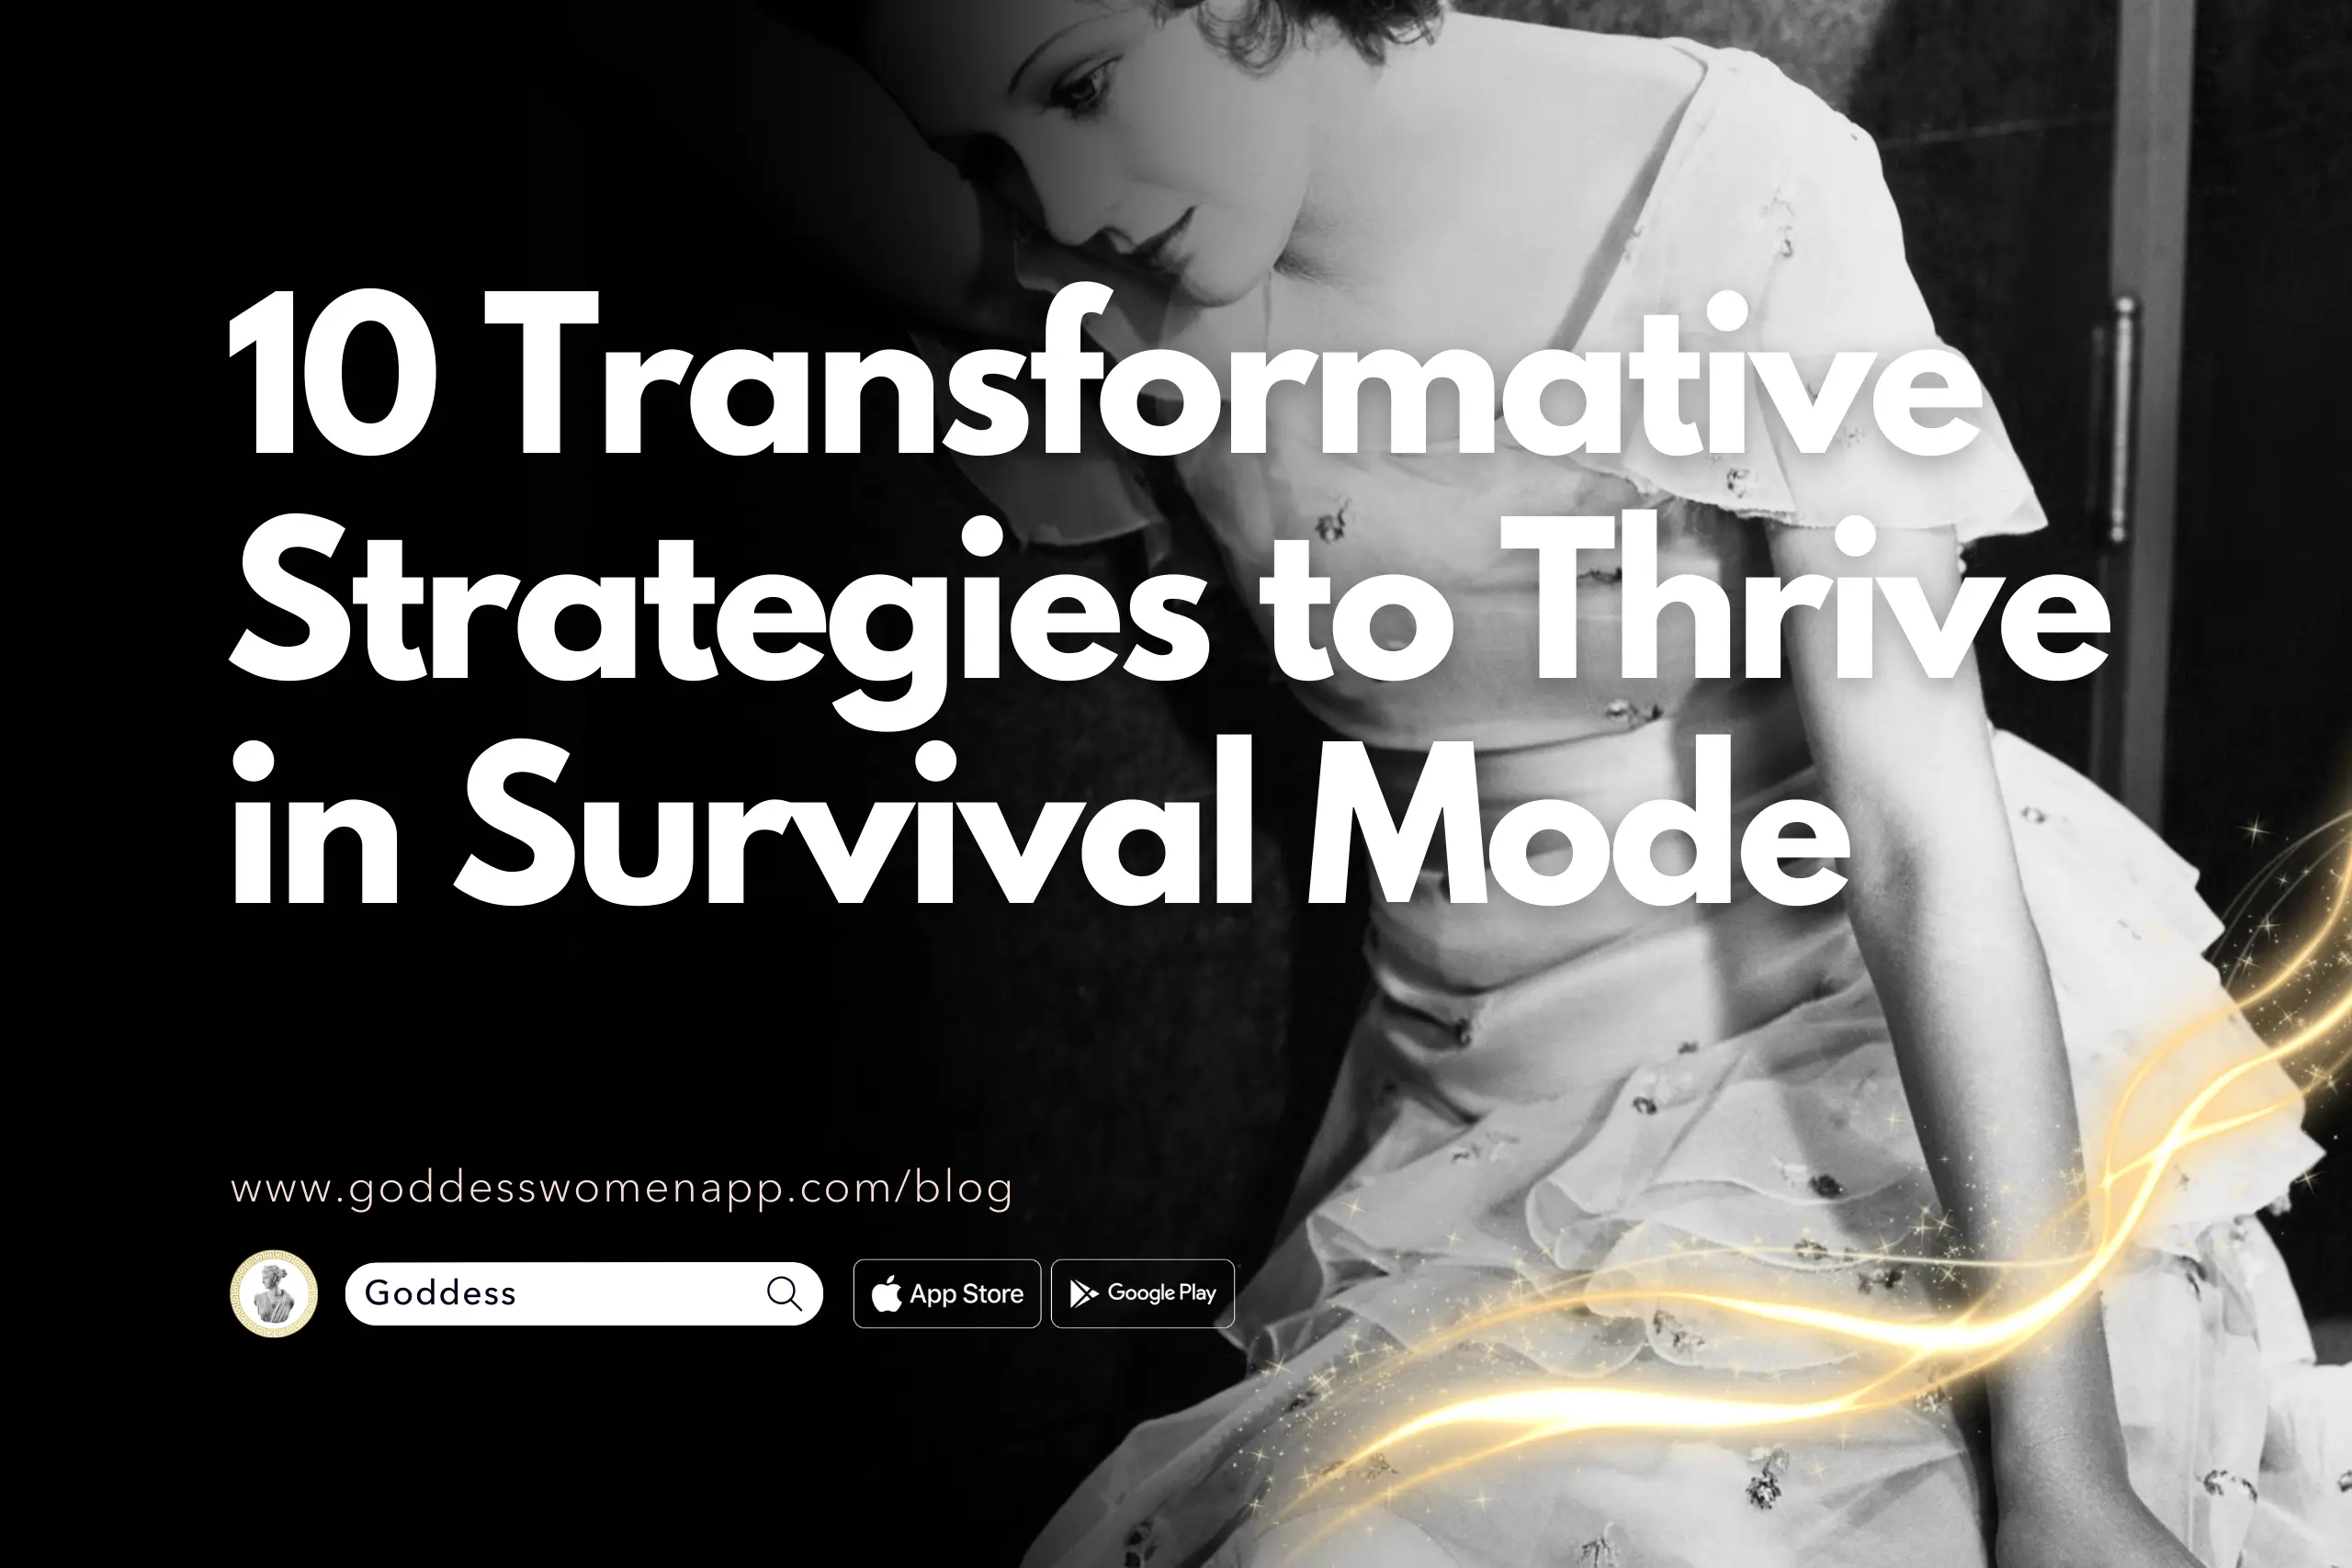 Survival Mode: 10 Transformative Strategies to Thrive